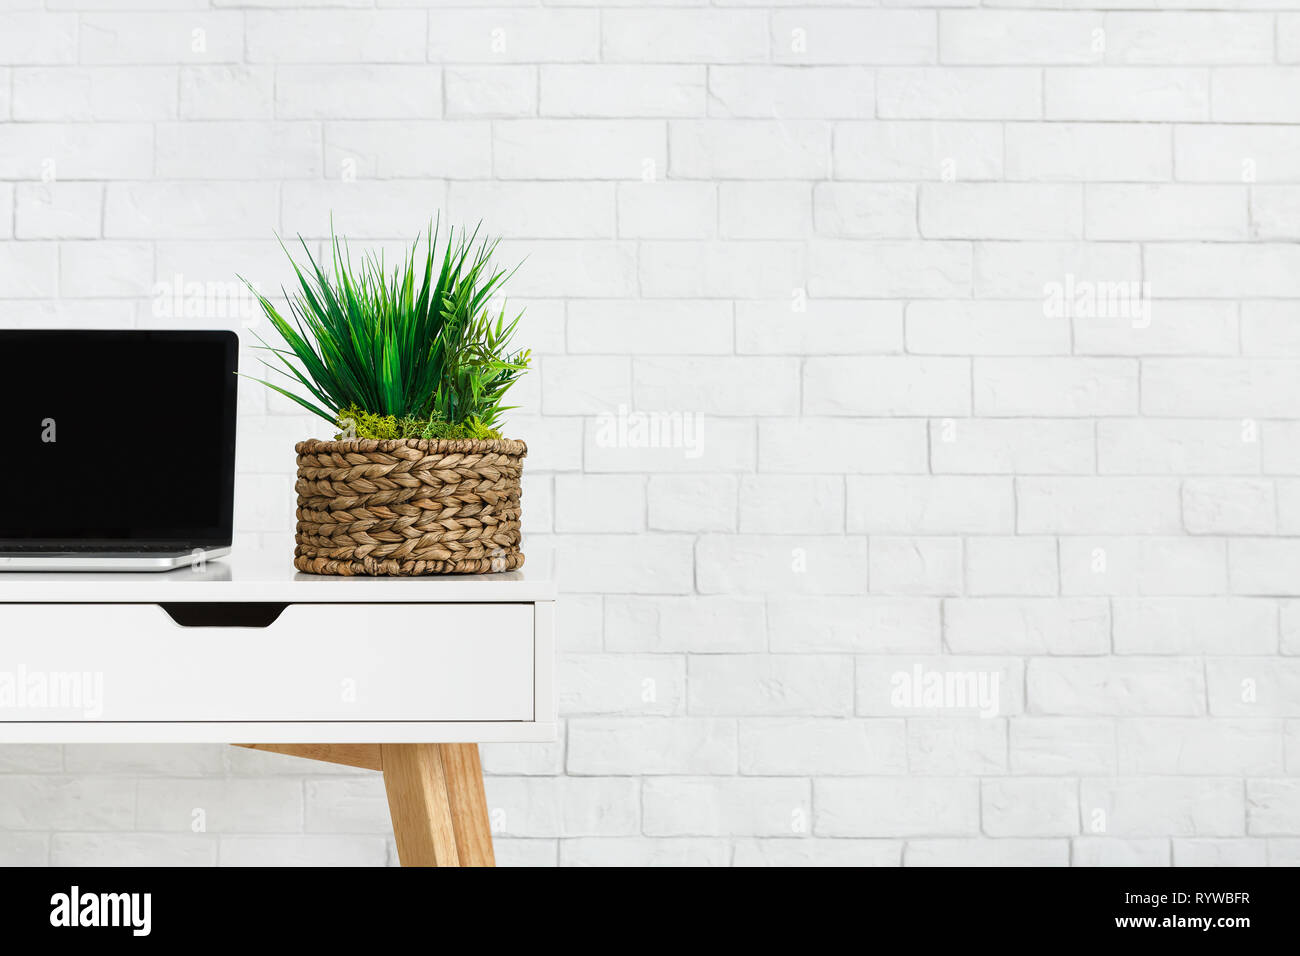 Laptop and pot with plants on desk, copy space Stock Photo